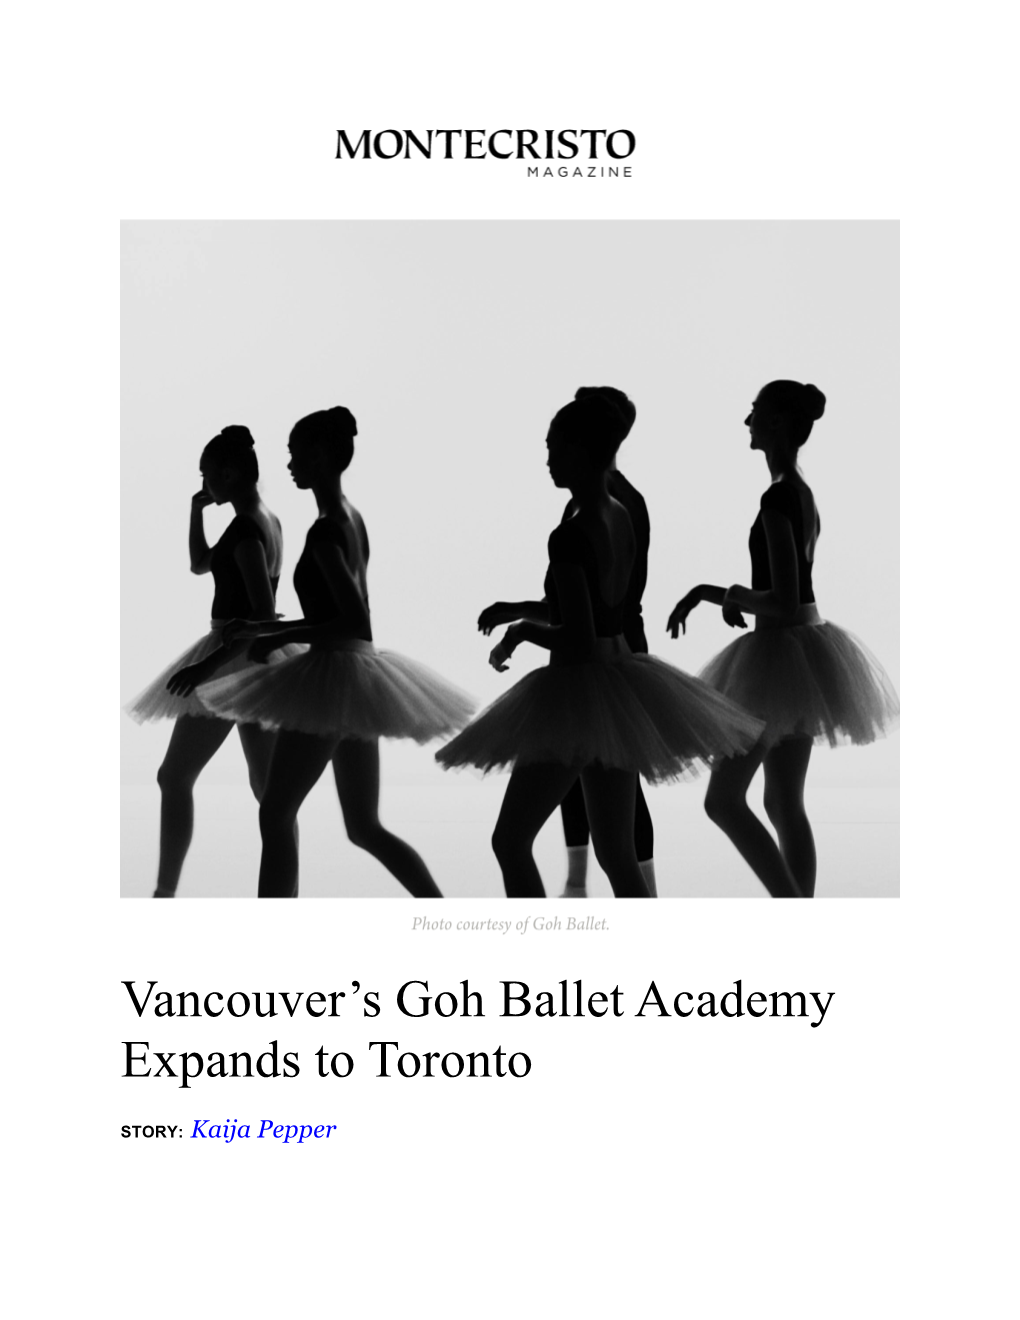 Vancouver's Goh Ballet Academy Expands to Toronto